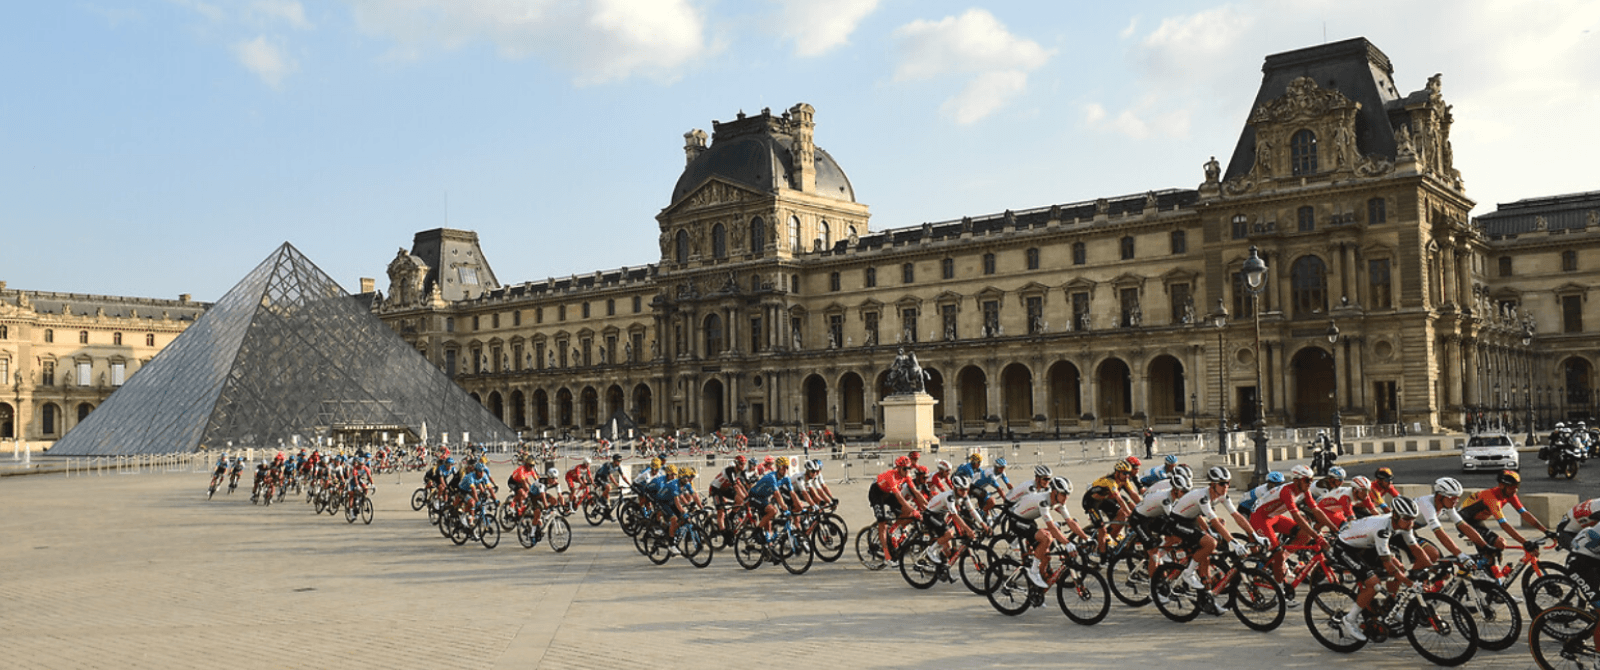 Place de la Concorde and just a few hundred meters from the finish line on the Champs-Élysées, the elegant Automobile Club de France is your prime location to experience the grand finale of the Tour de France.